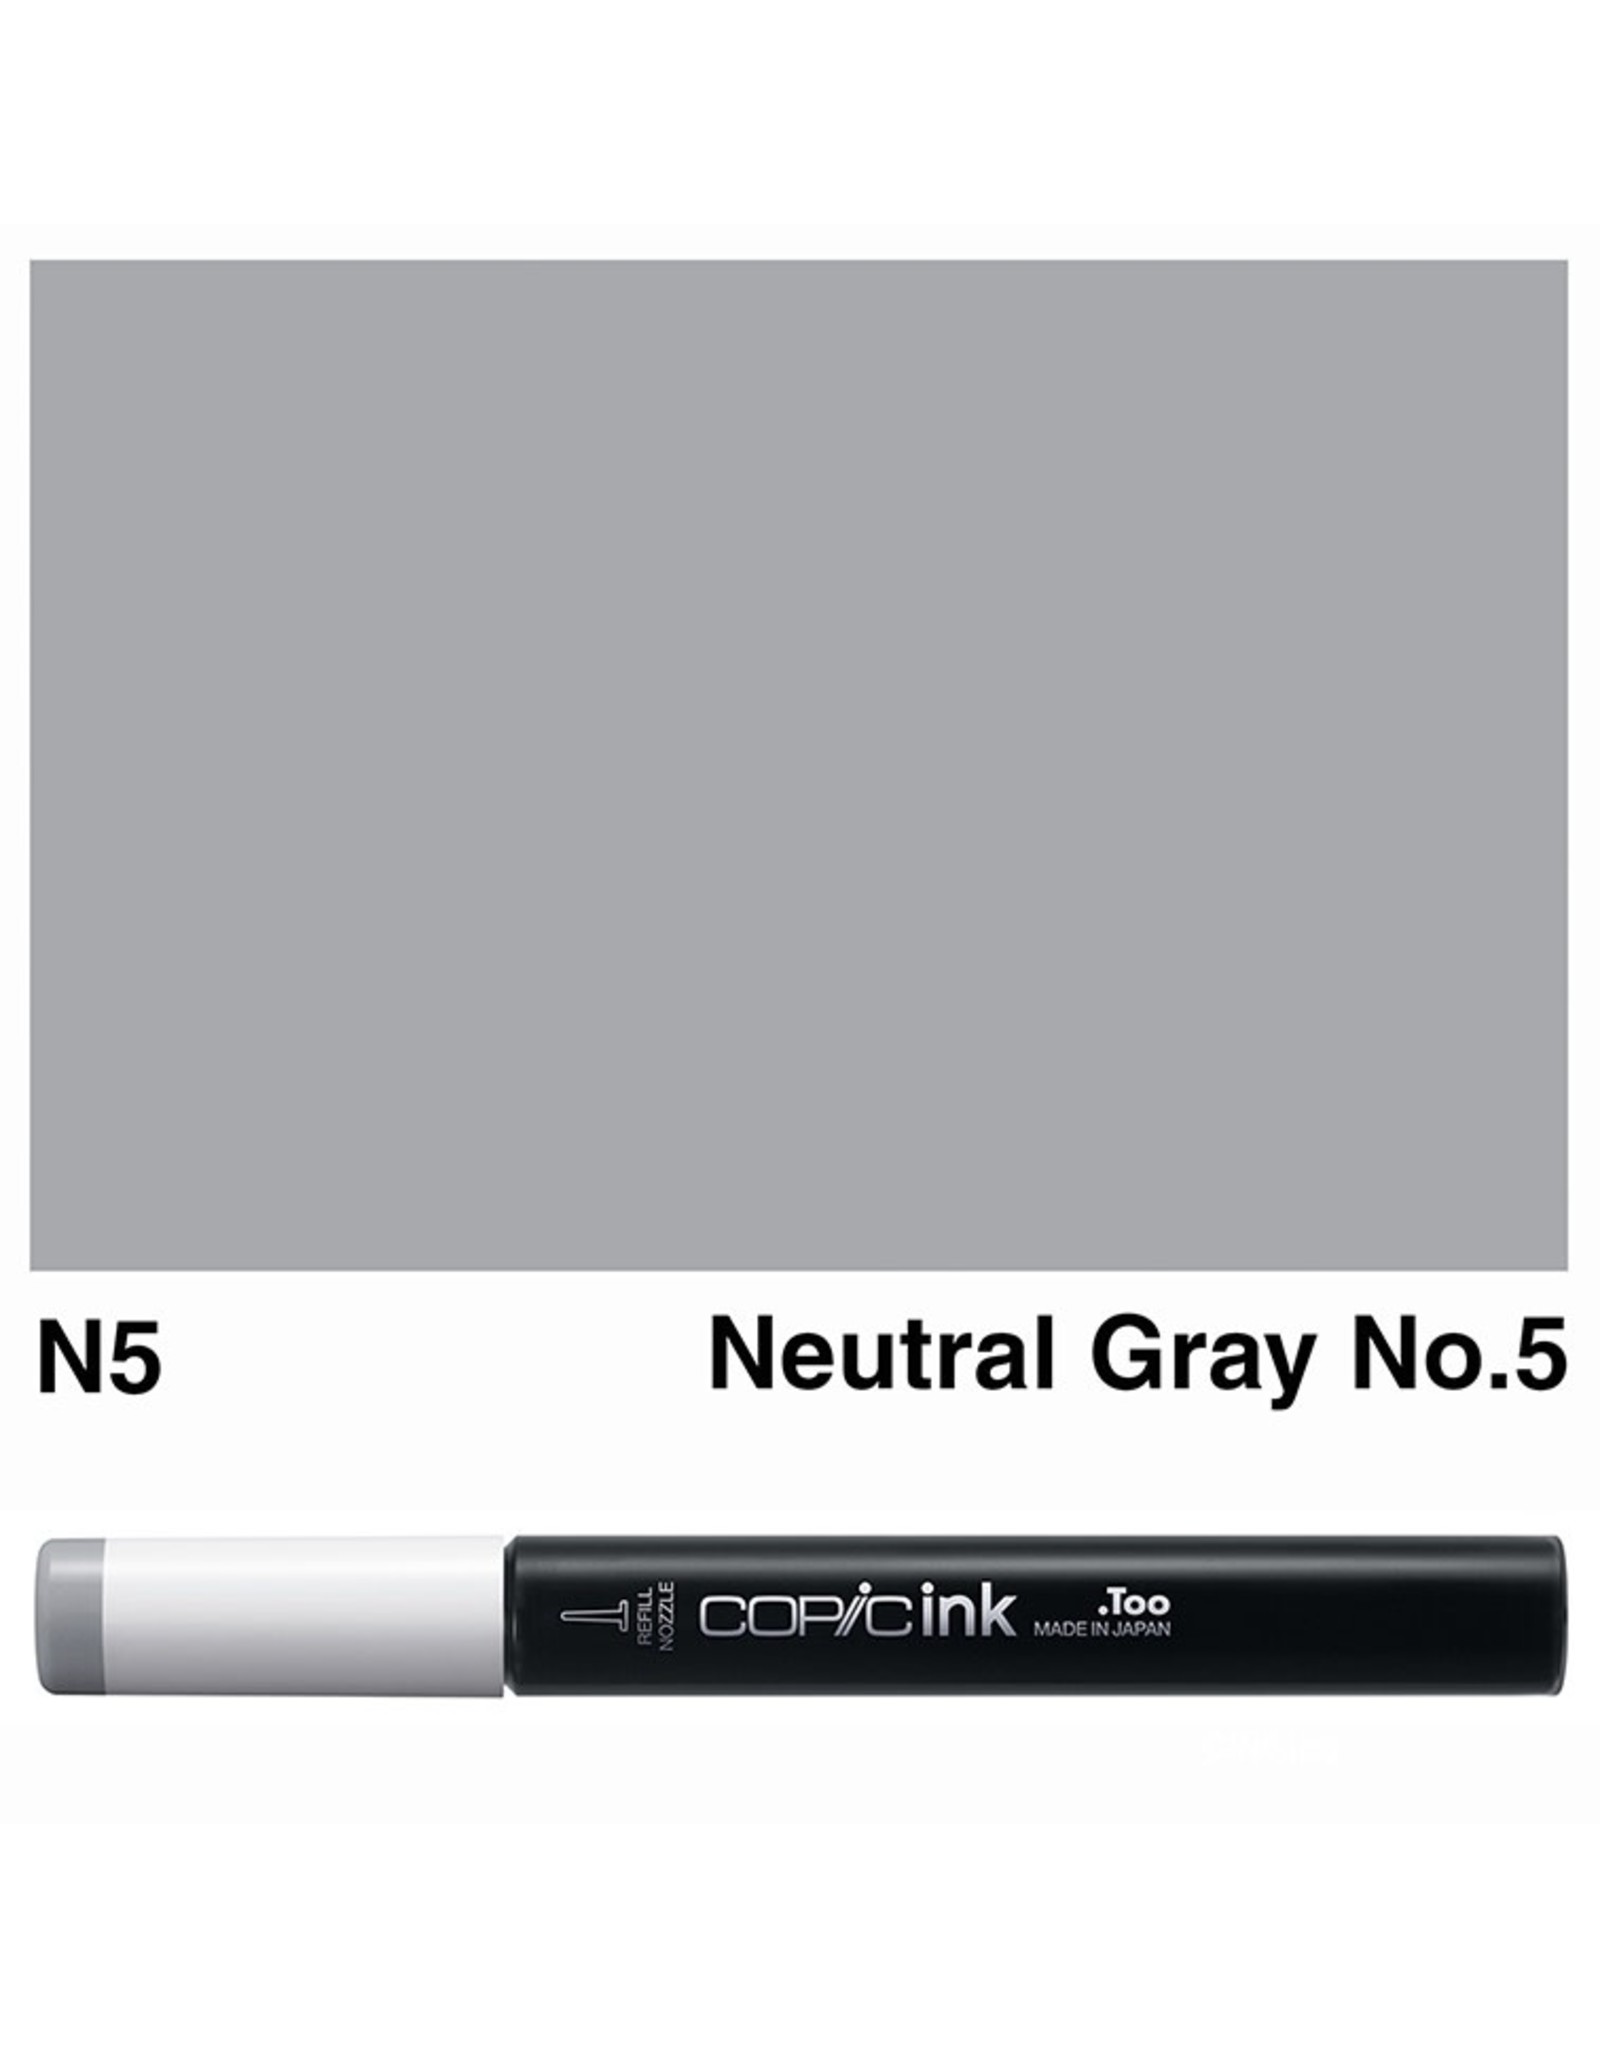 COPIC COPIC N5 NEUTRAL GRAY #5 REFILL